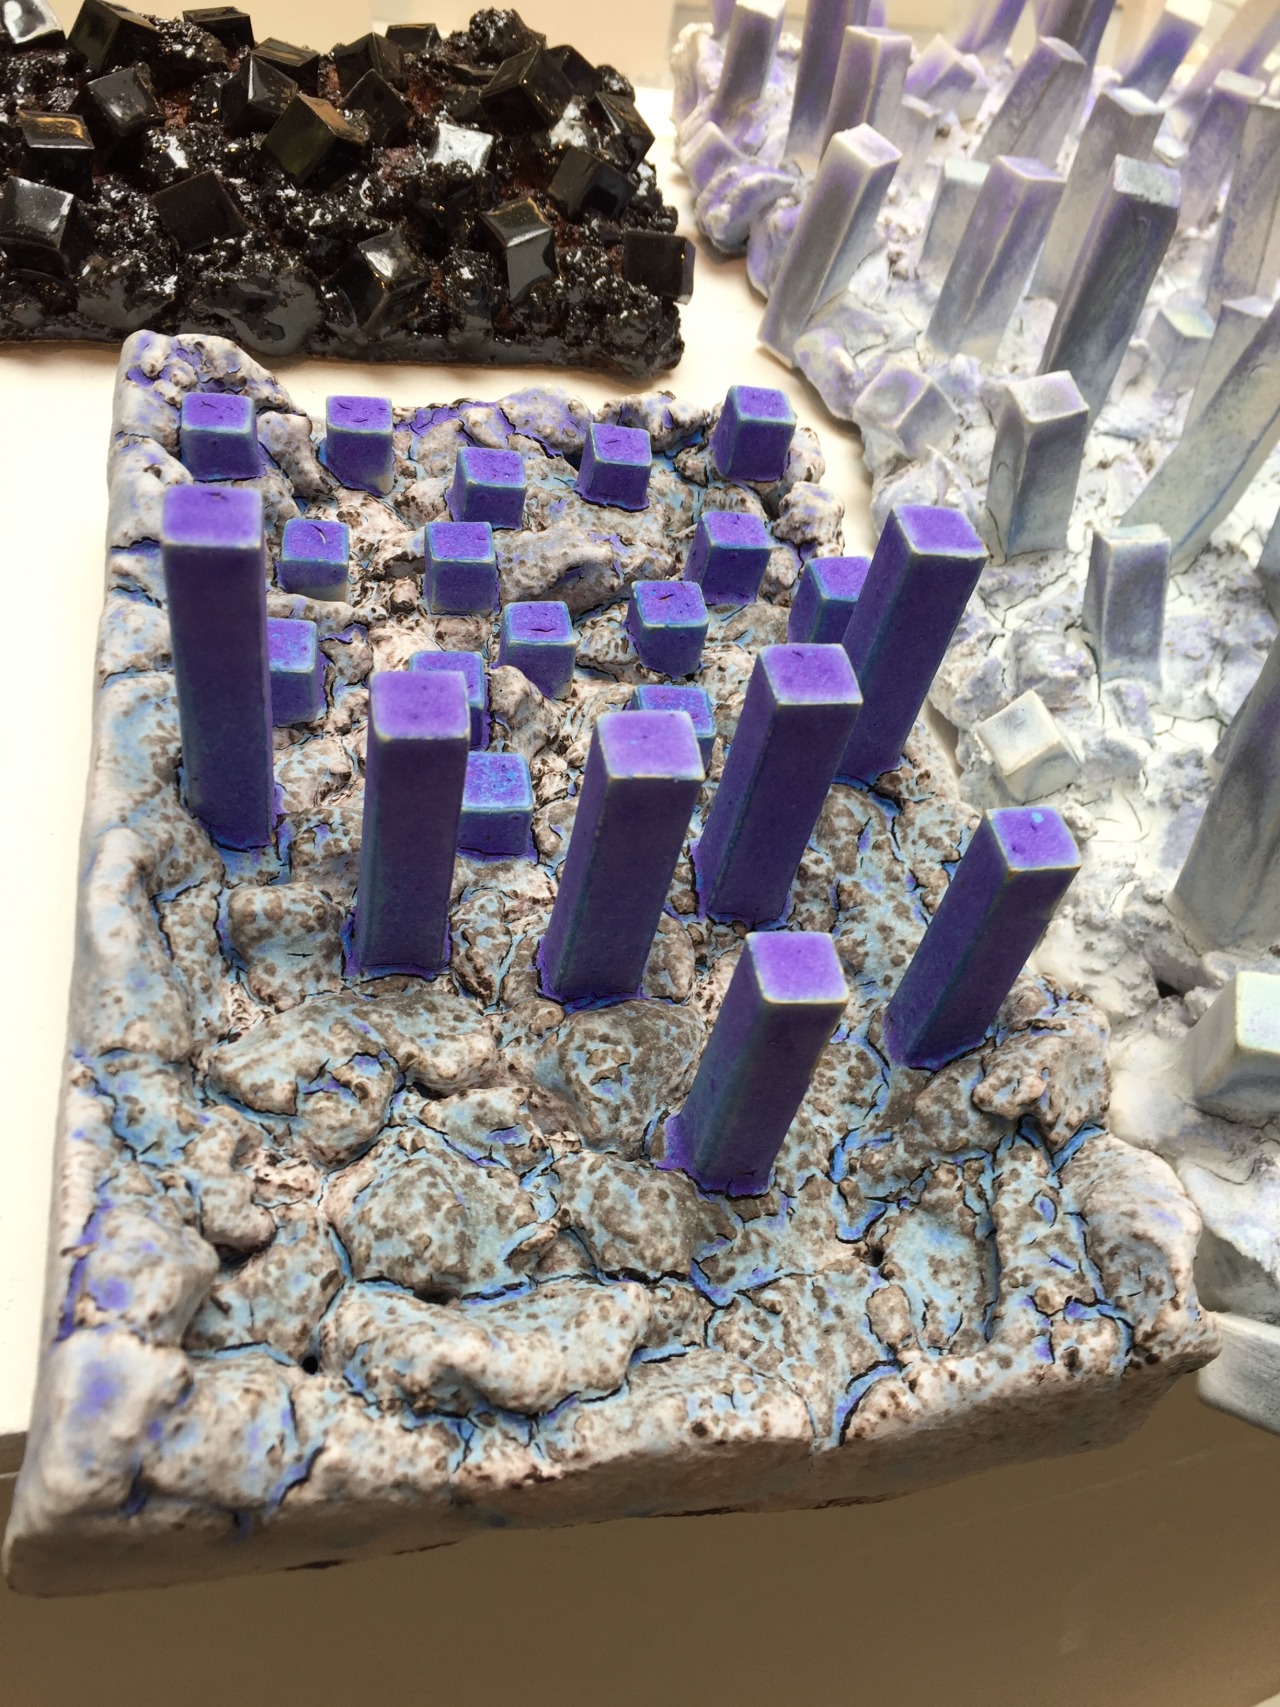 A ceramic sculpture. Captures the image of a flat, rocky ground in white and blues. On top lots of purple parallelepipeds protrude.